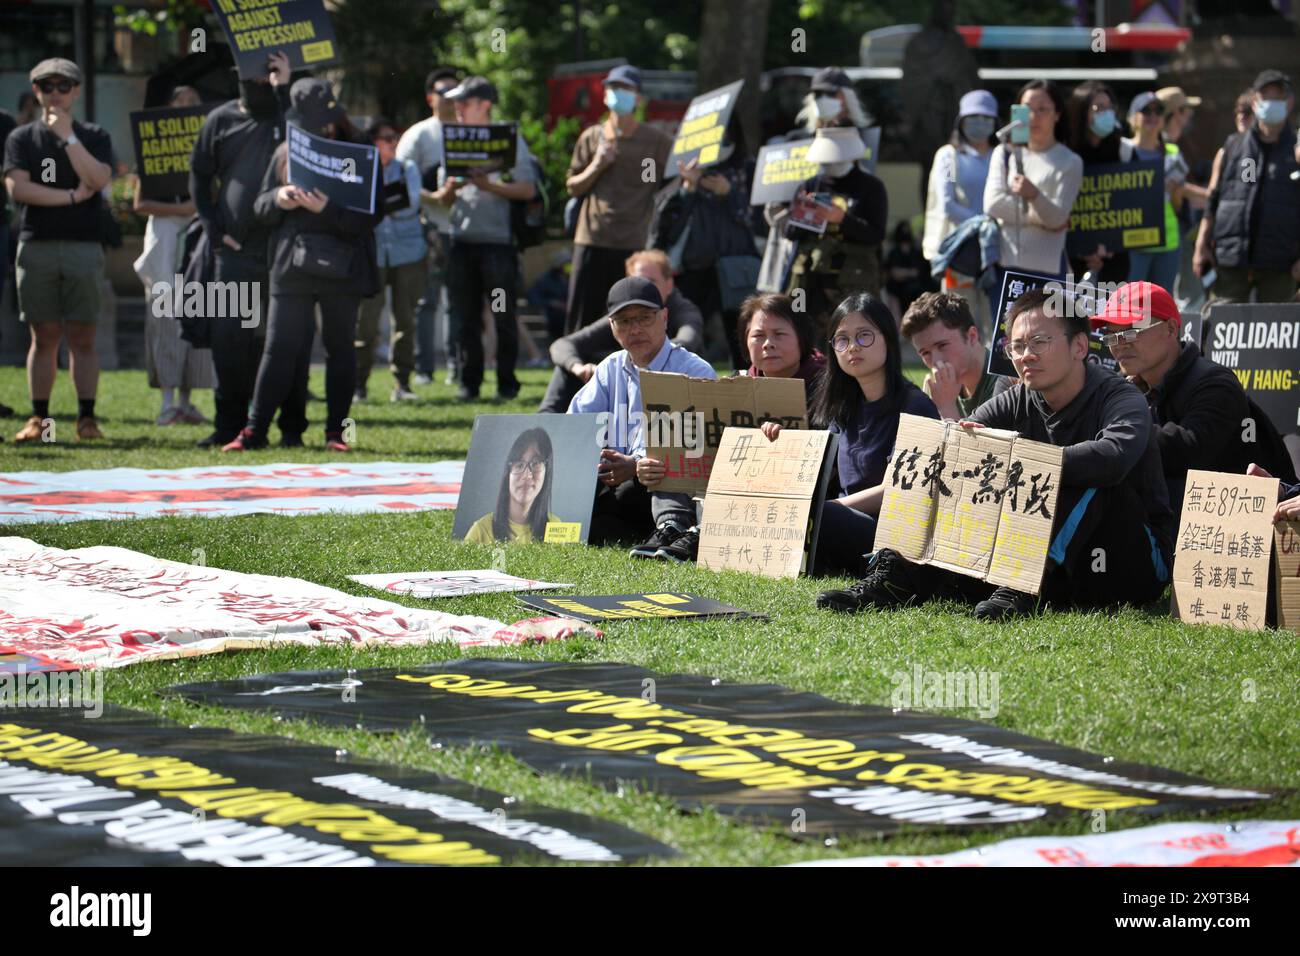 June 2, 2024, London, England, UK: Protesters gather together holding signs supporting their position, while banners are laid on the grass during the demonstration in Parliament Square. The event commemorated the1989 student-led protests and the Chinese government's bloody crackdown on 4 June, as well as protest against China's current clampdown on freedom of speech - including its increasing repression of Tibetans and Uyghurs, its crushing of dissent in Hong Kong, and the intimidation of Chinese and Hong Kong students in the UK, Europe and North America. Thirty-five years on, the Chinese auth Stock Photo